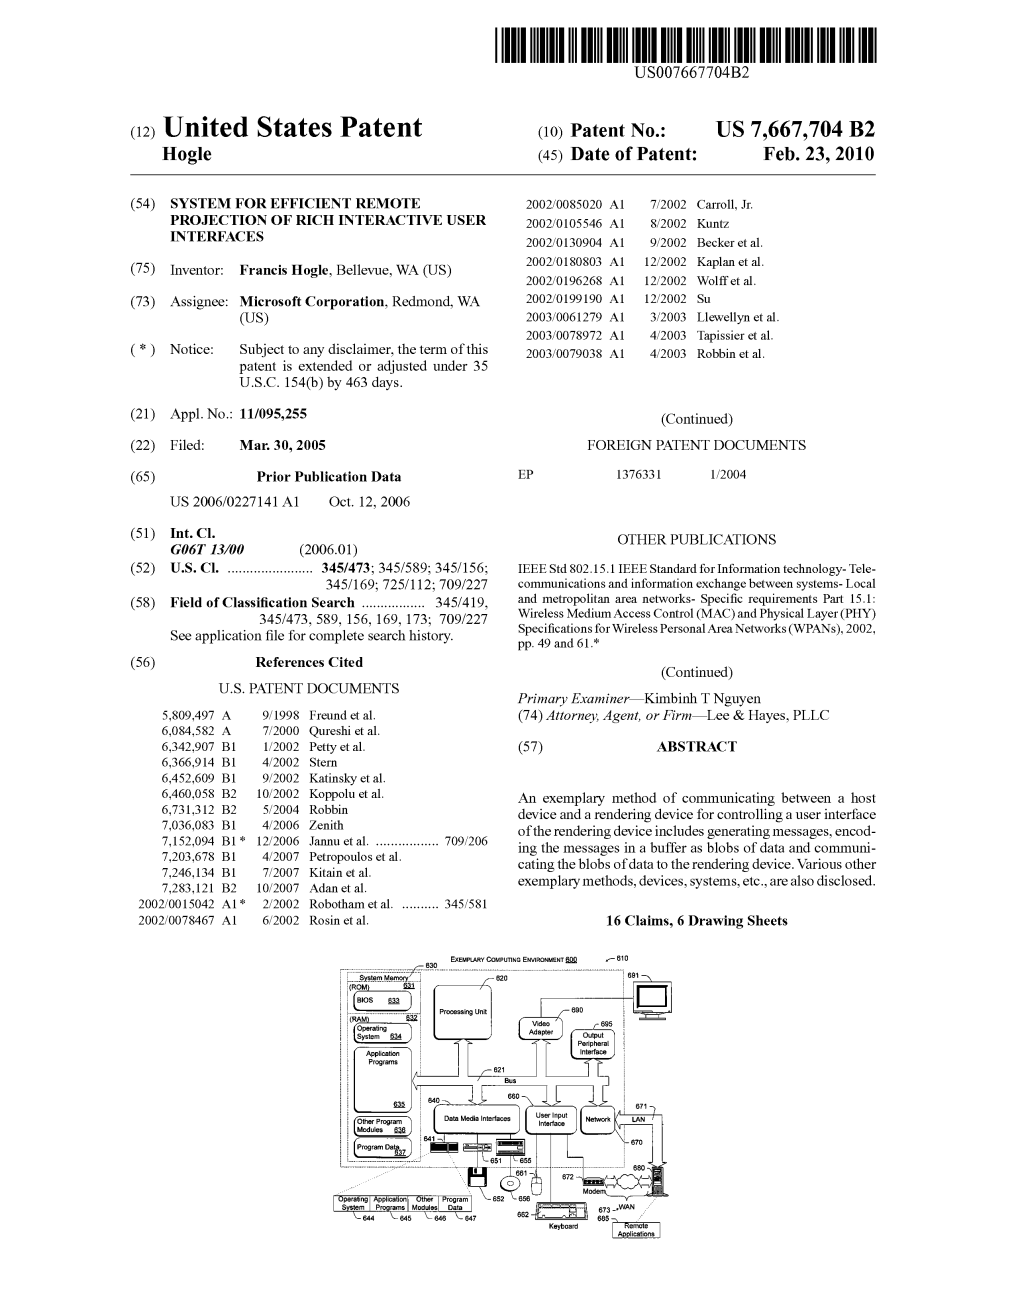 (12) Ulllted States Patent (10) Patent N0.: US 7,667,704 B2 Hogle (45) Date of Patent: Feb